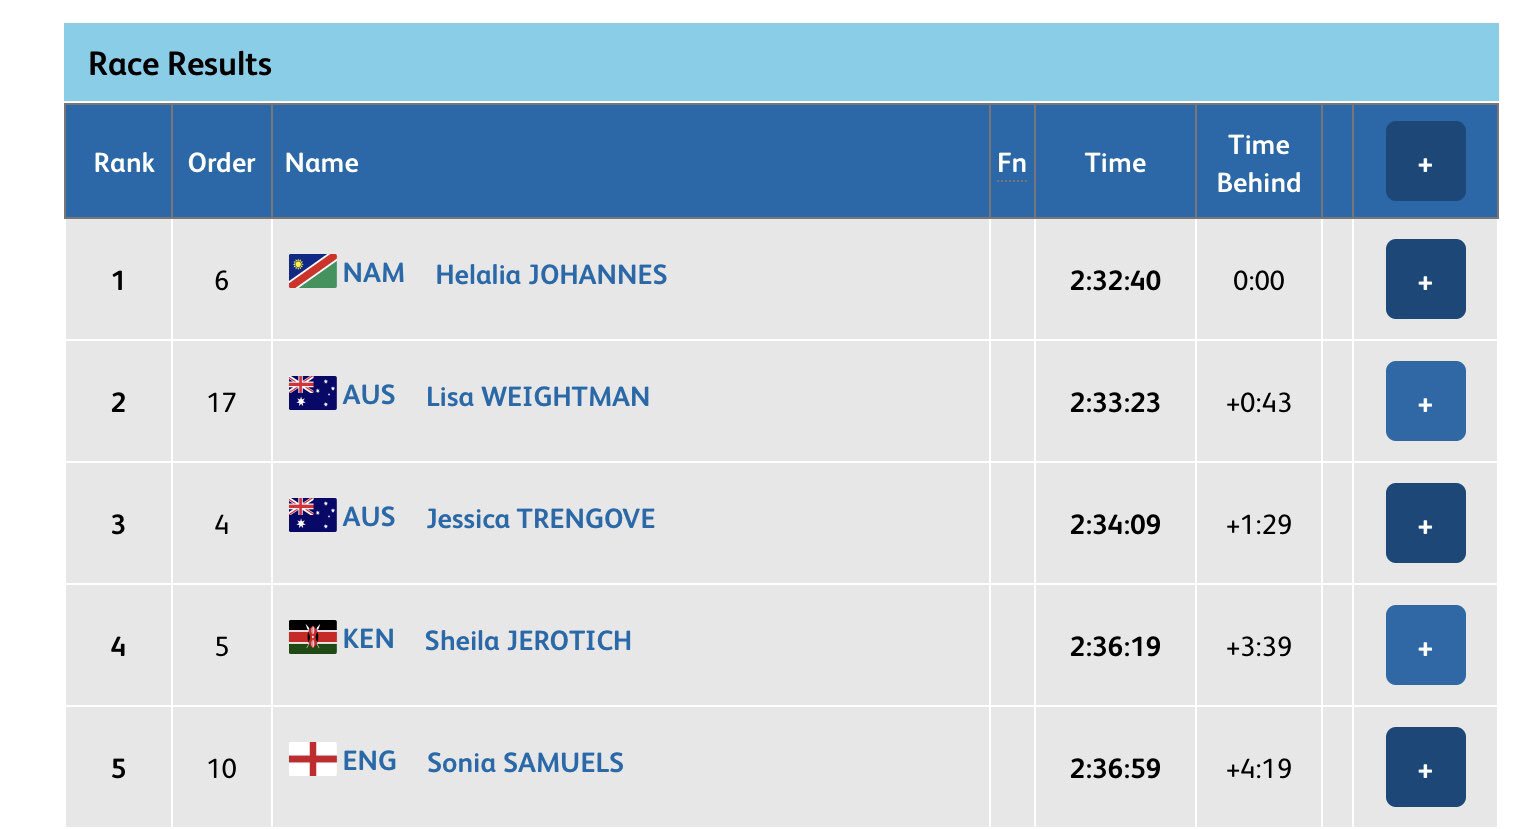 MARATHON WOMEN GOLD for NAMIBIA 🇳🇦 

Helalia Johannes wins the @GC2018 Commonwealth Games women’s Marathon title in 2:32:40.

Australians Lisa Weightman takes silver in 2:33:23 and Jessica Trengove finished third in 2:34:09. 

#GC2018Athletics #GC2018 #GC2018MARATHON https://t.co/W4C5Oui6mM